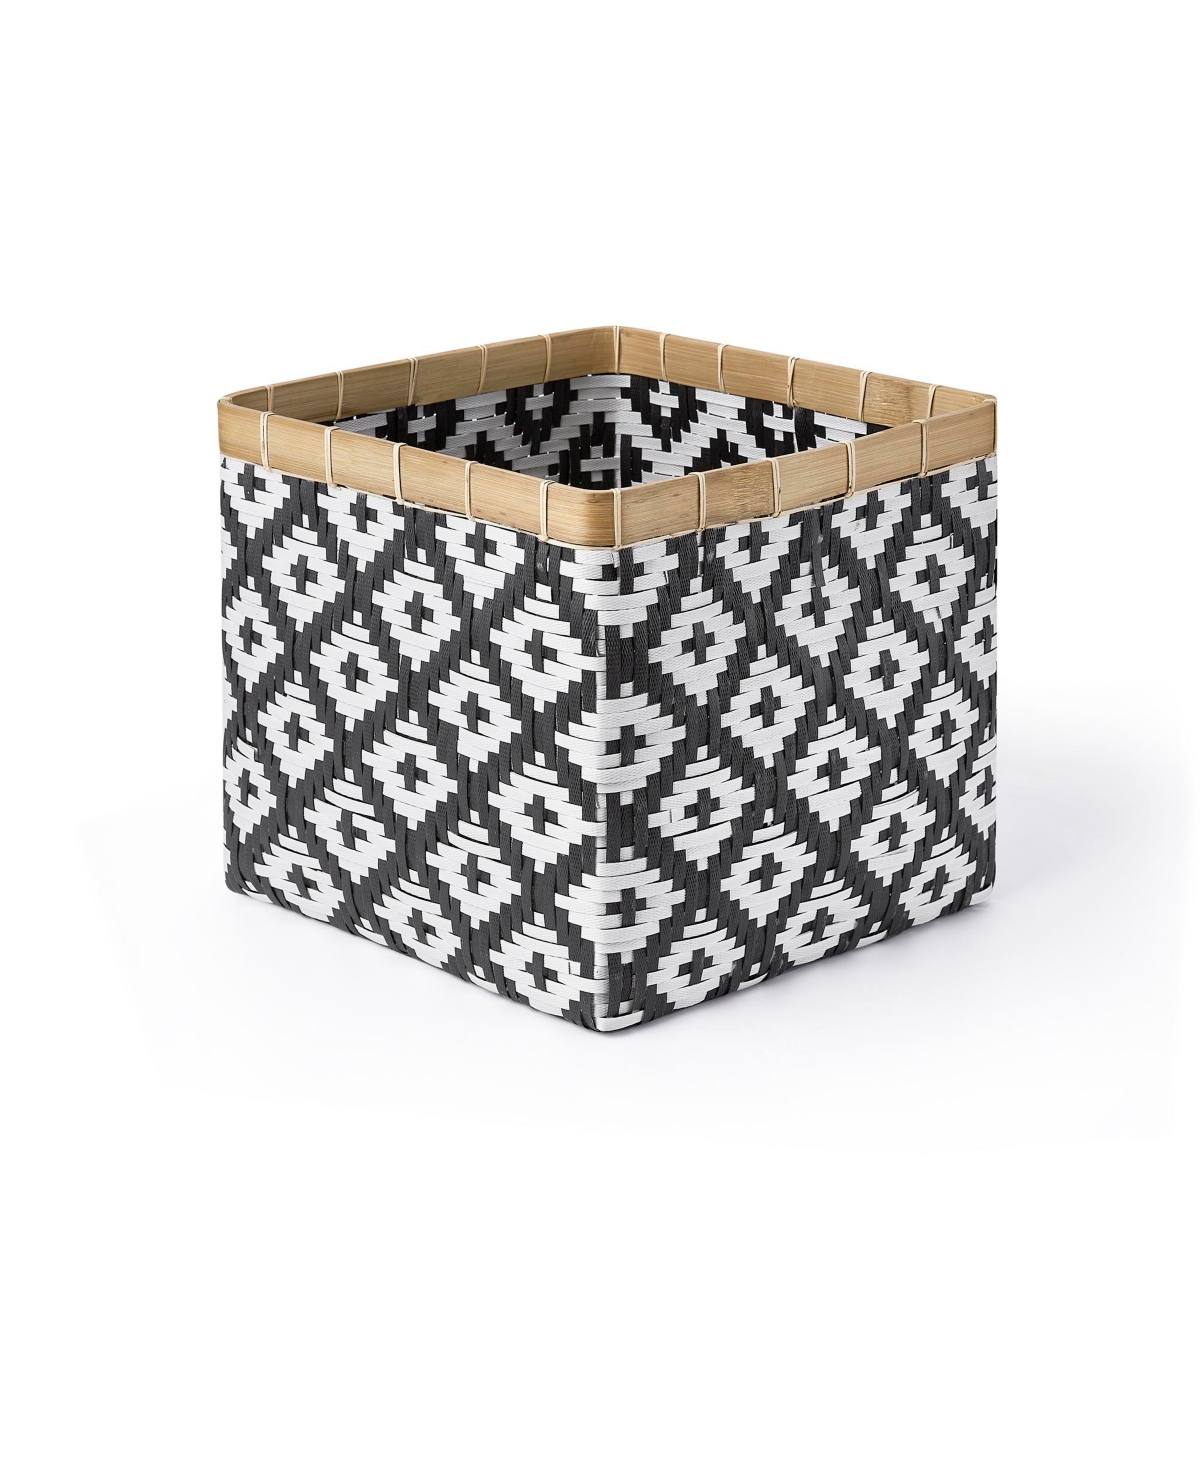 Shop Baum 3 Piece Square Bamboo Basket Set With No Handles, Natural Rim In Black And White